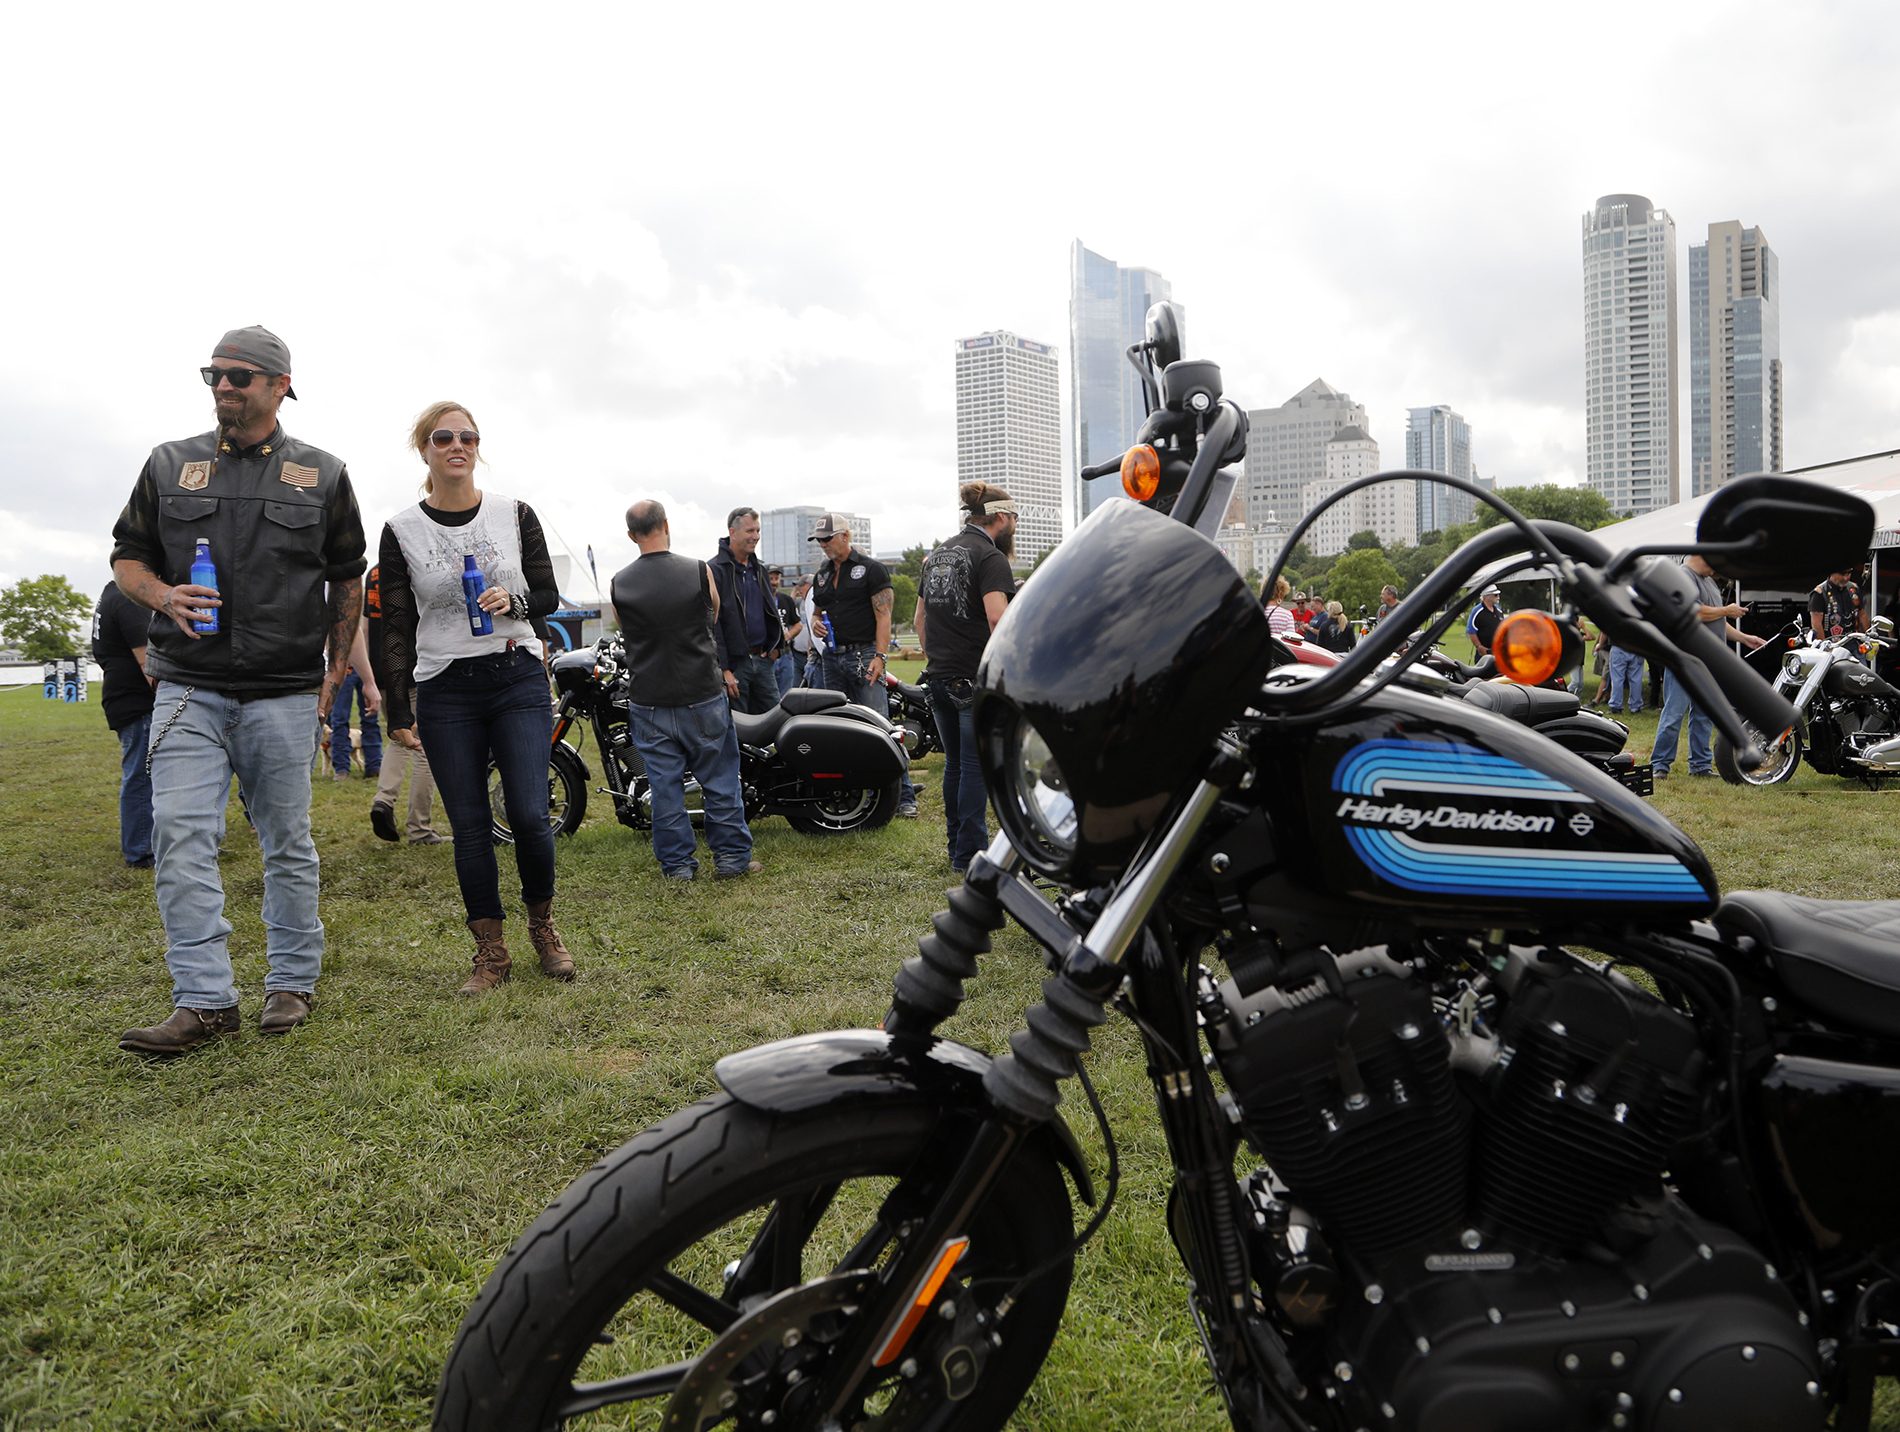 Riders from around the world arrived in Milwaukee to celebrate Harley-Davidson's 115th Anniversary